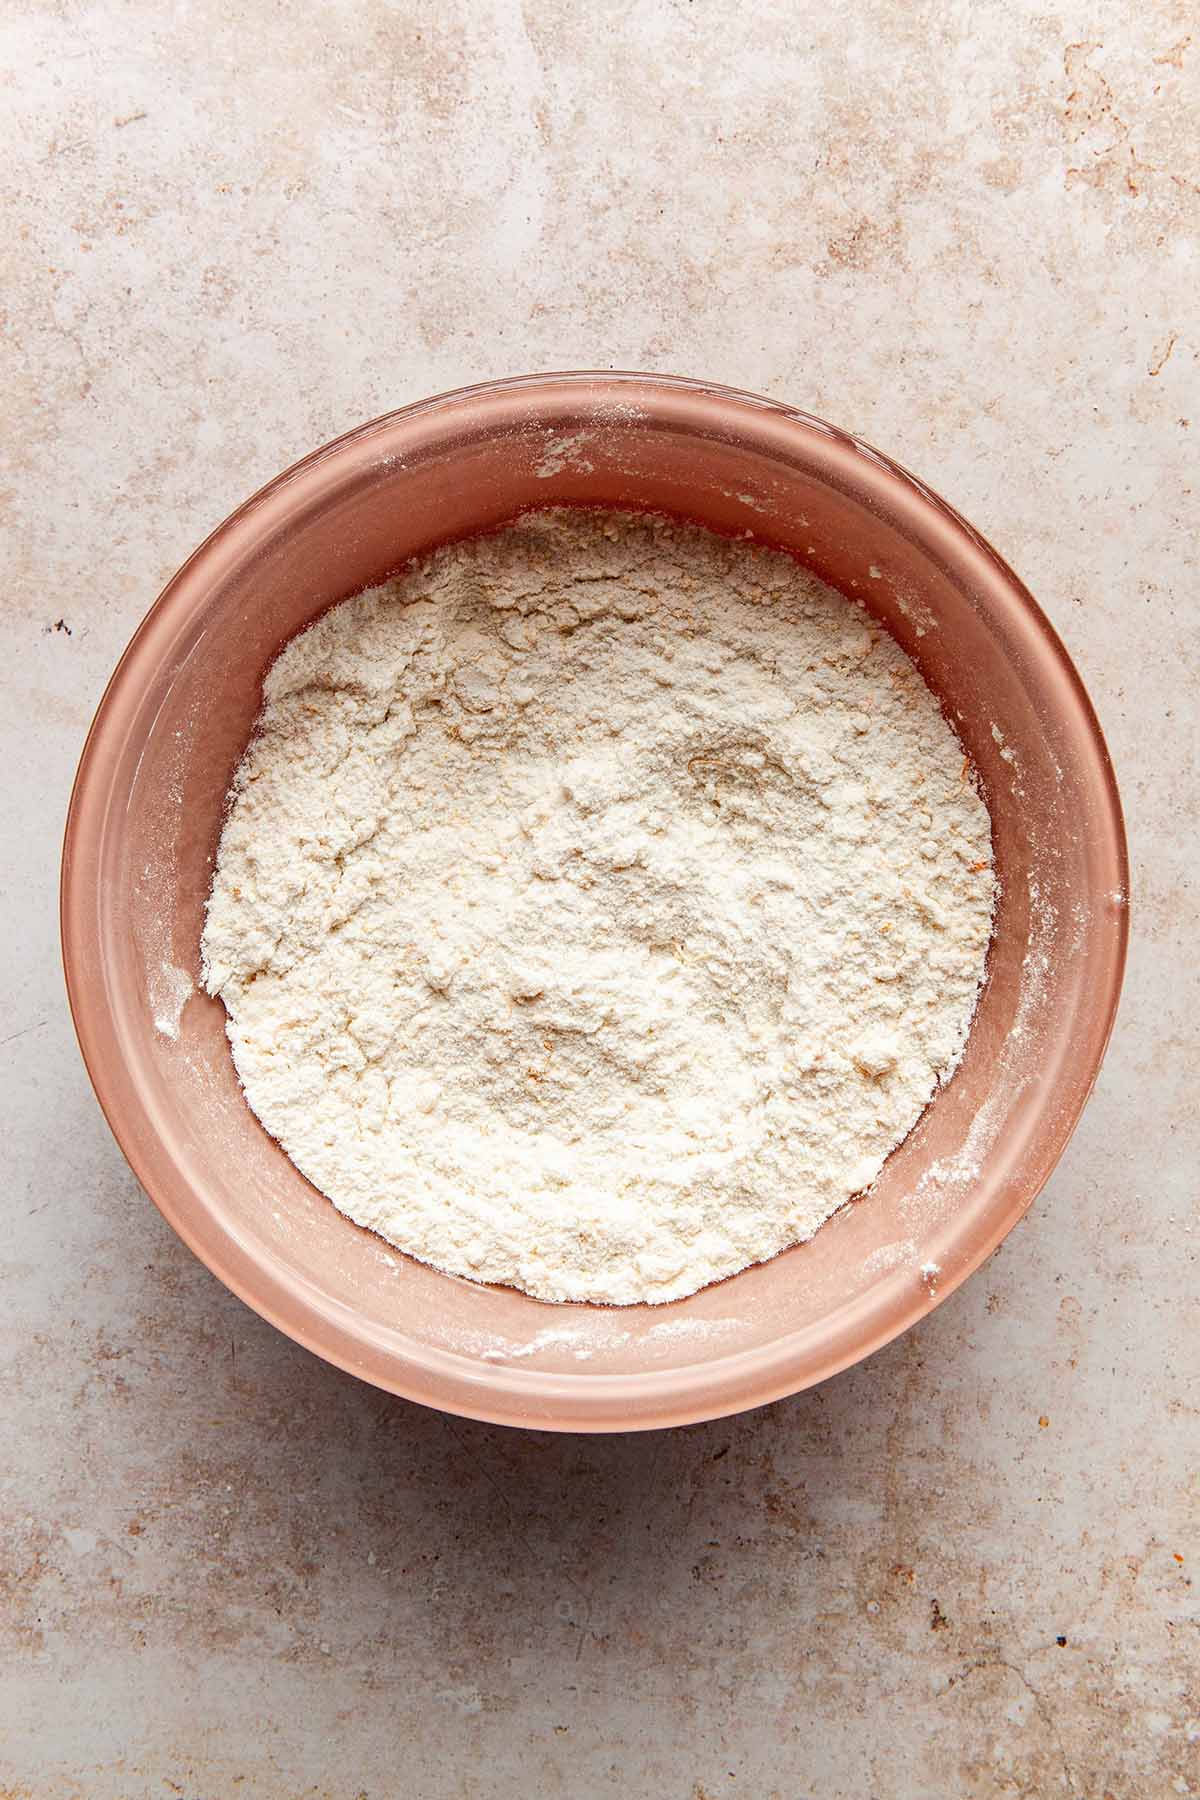 A bowl of dry cake ingredients.